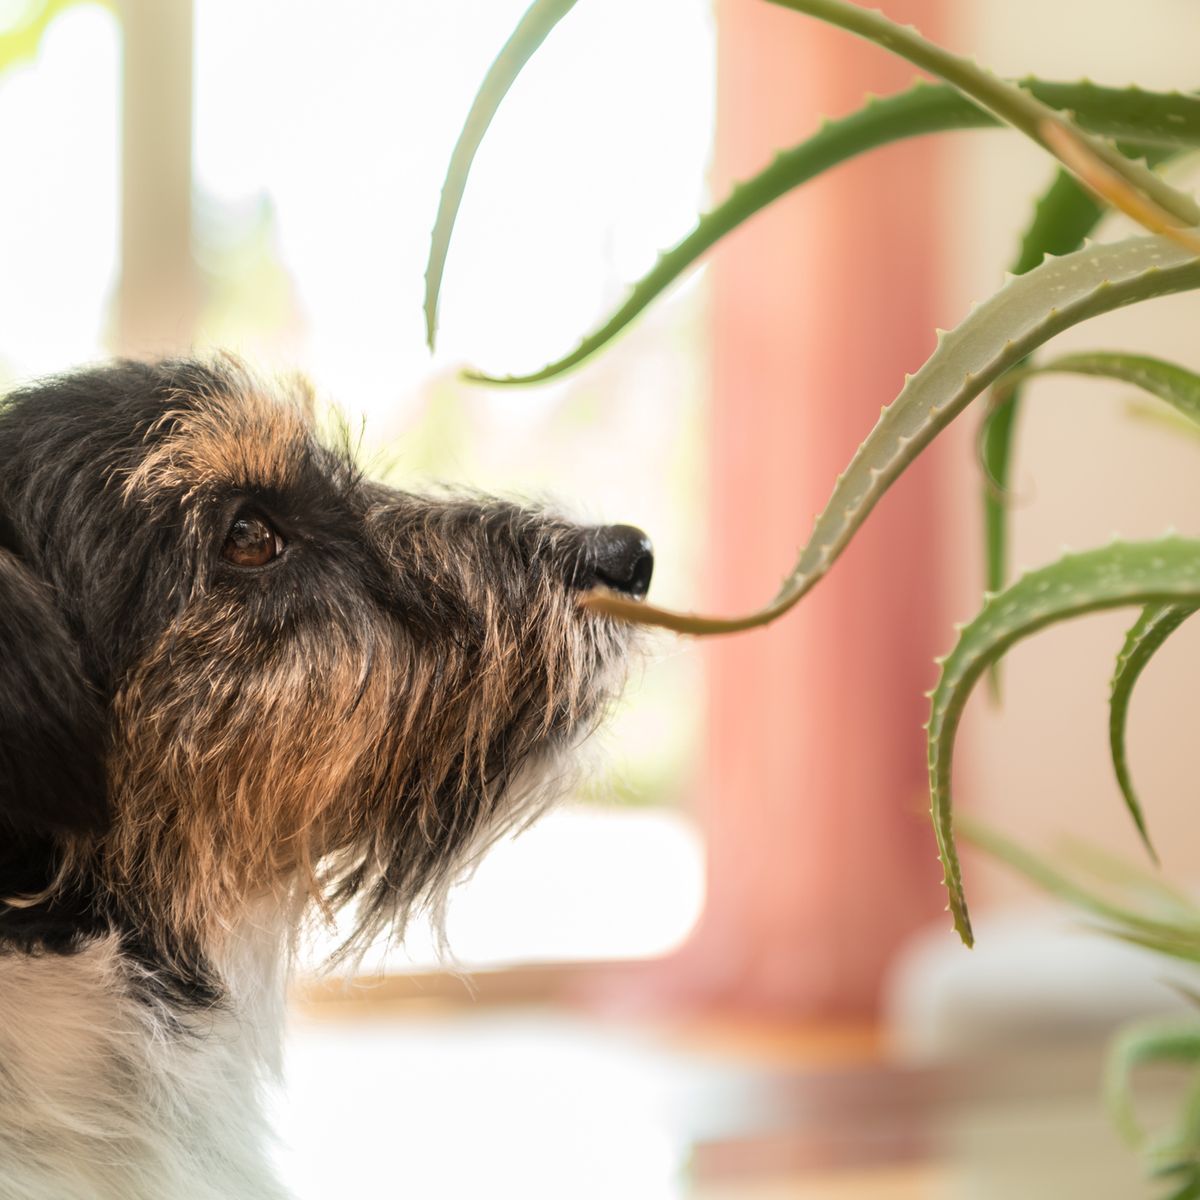 Plants That are Toxic for Dogs